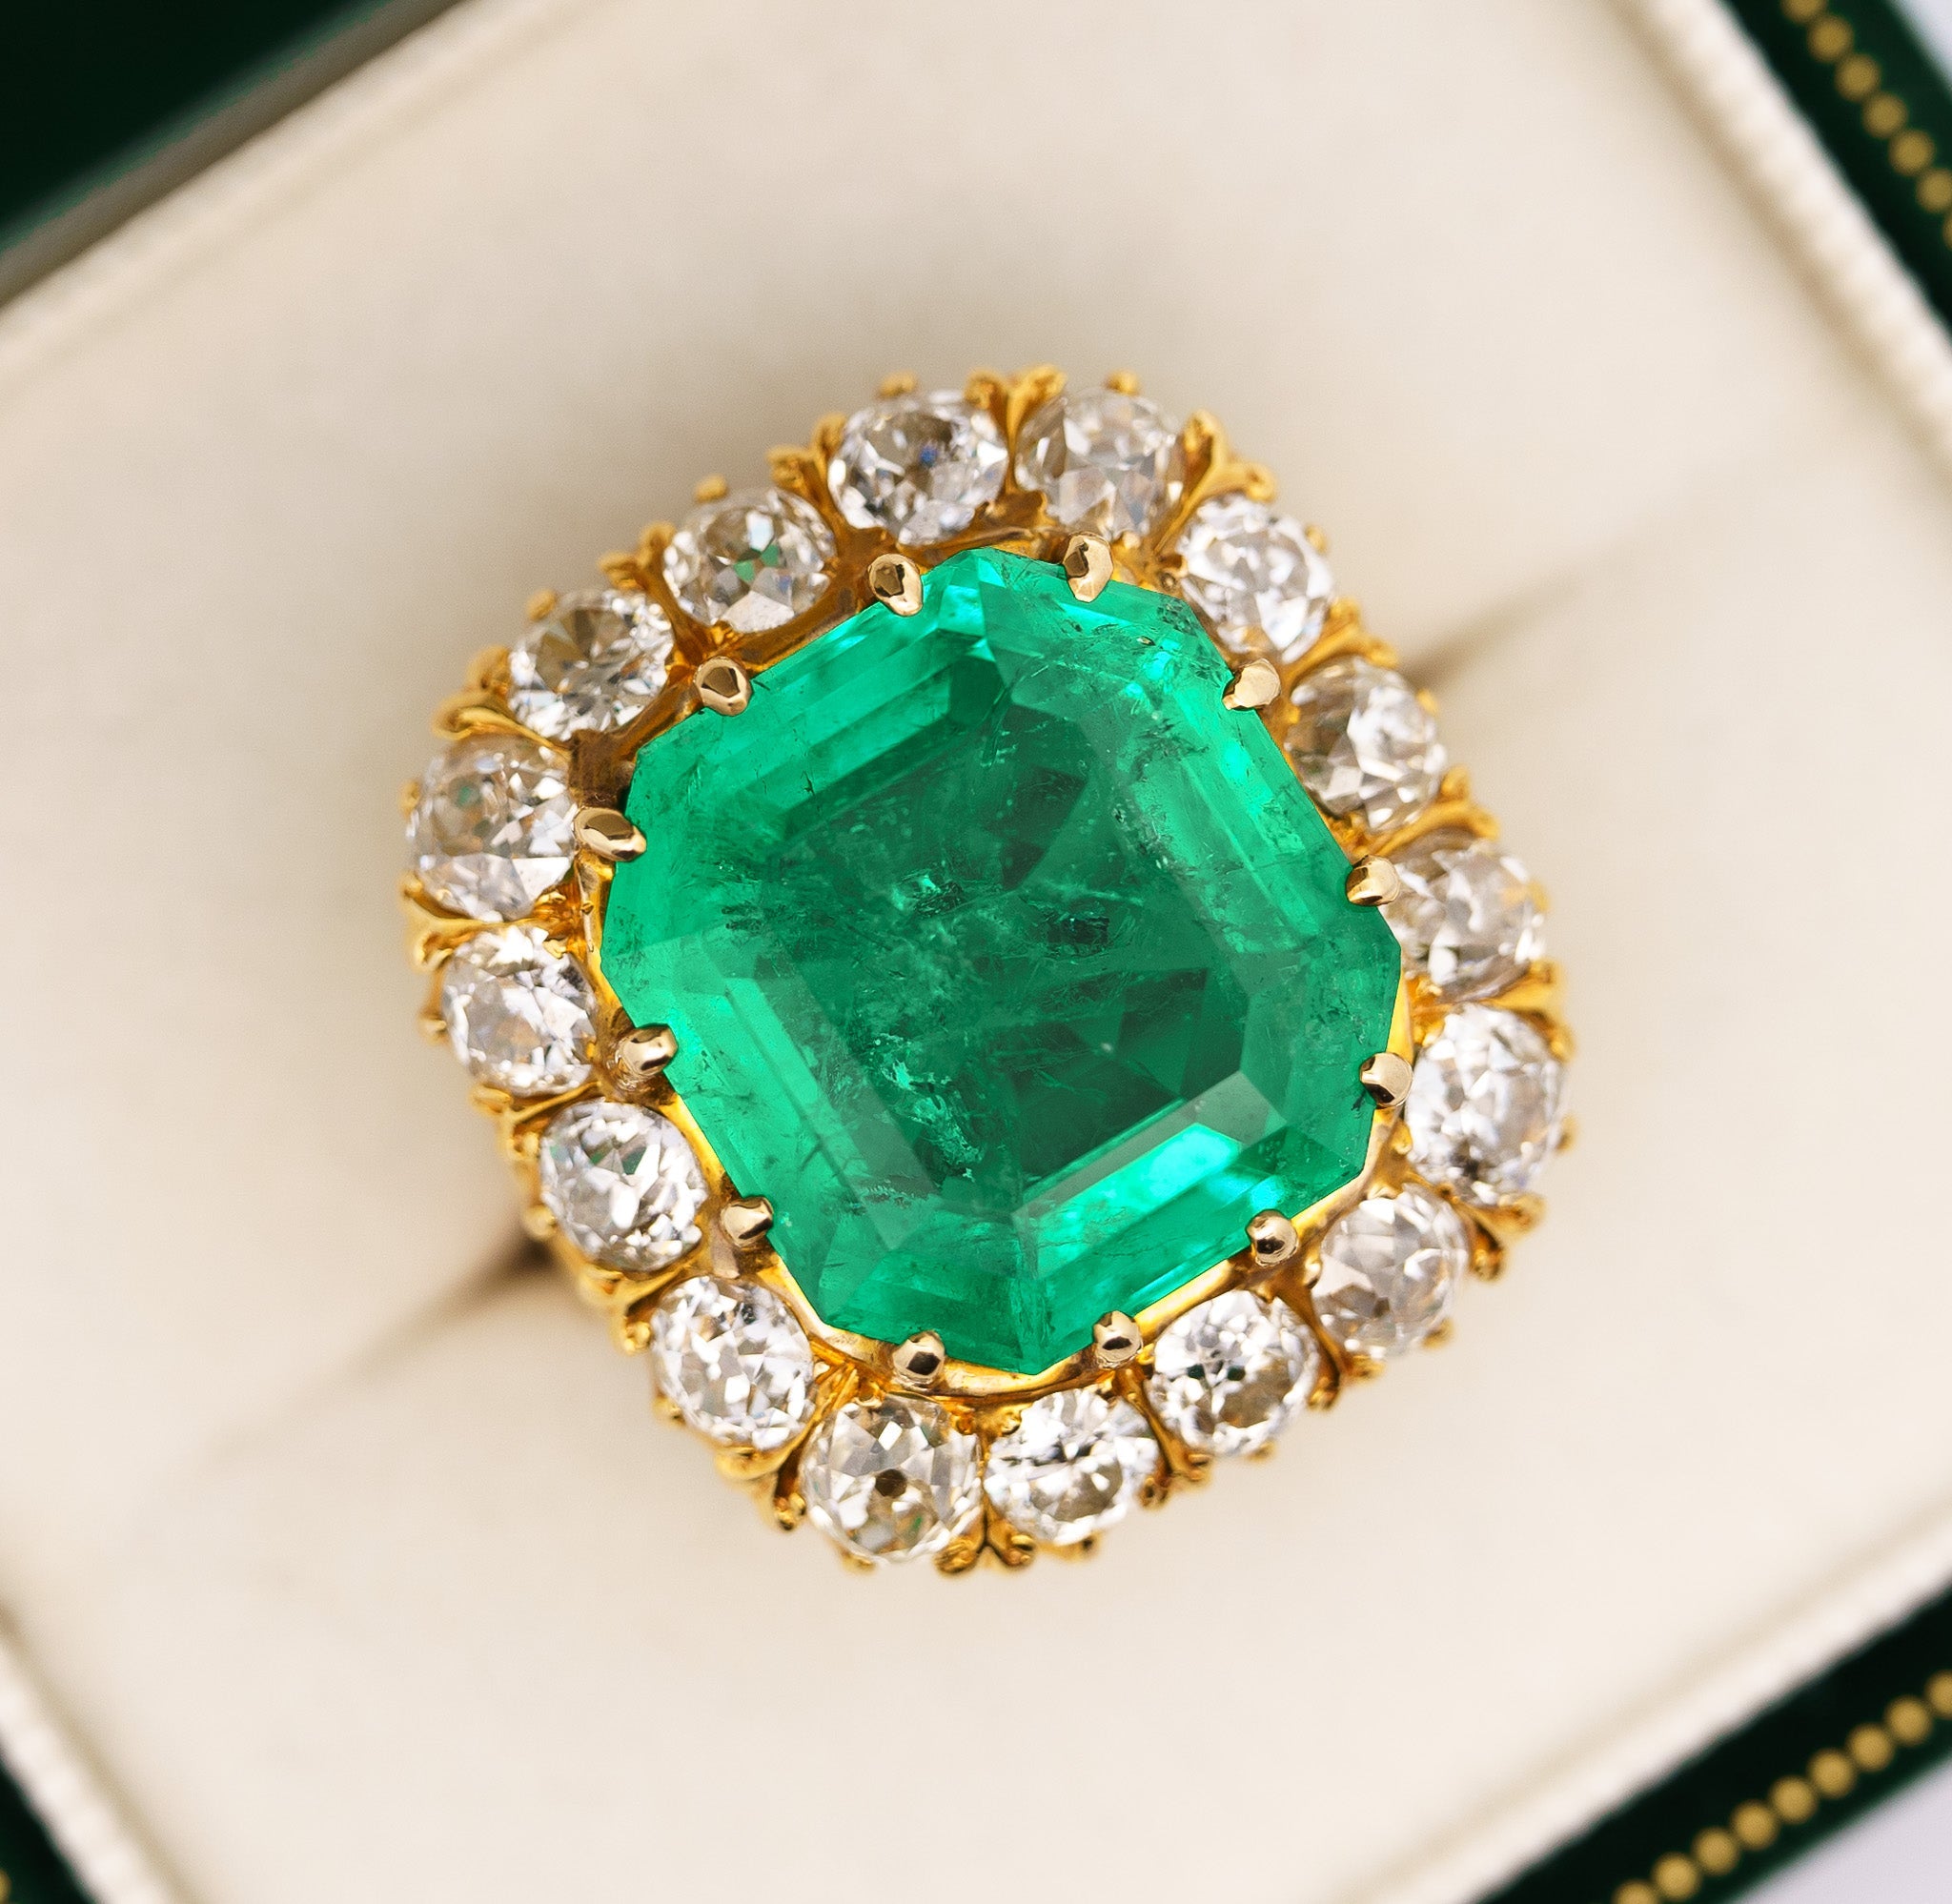 14_51-Carat-Insignificant-Oil-Colombian-Emerald-Old-Euro-Cut-Diamond-Halo-Ring-Rings-2.jpg